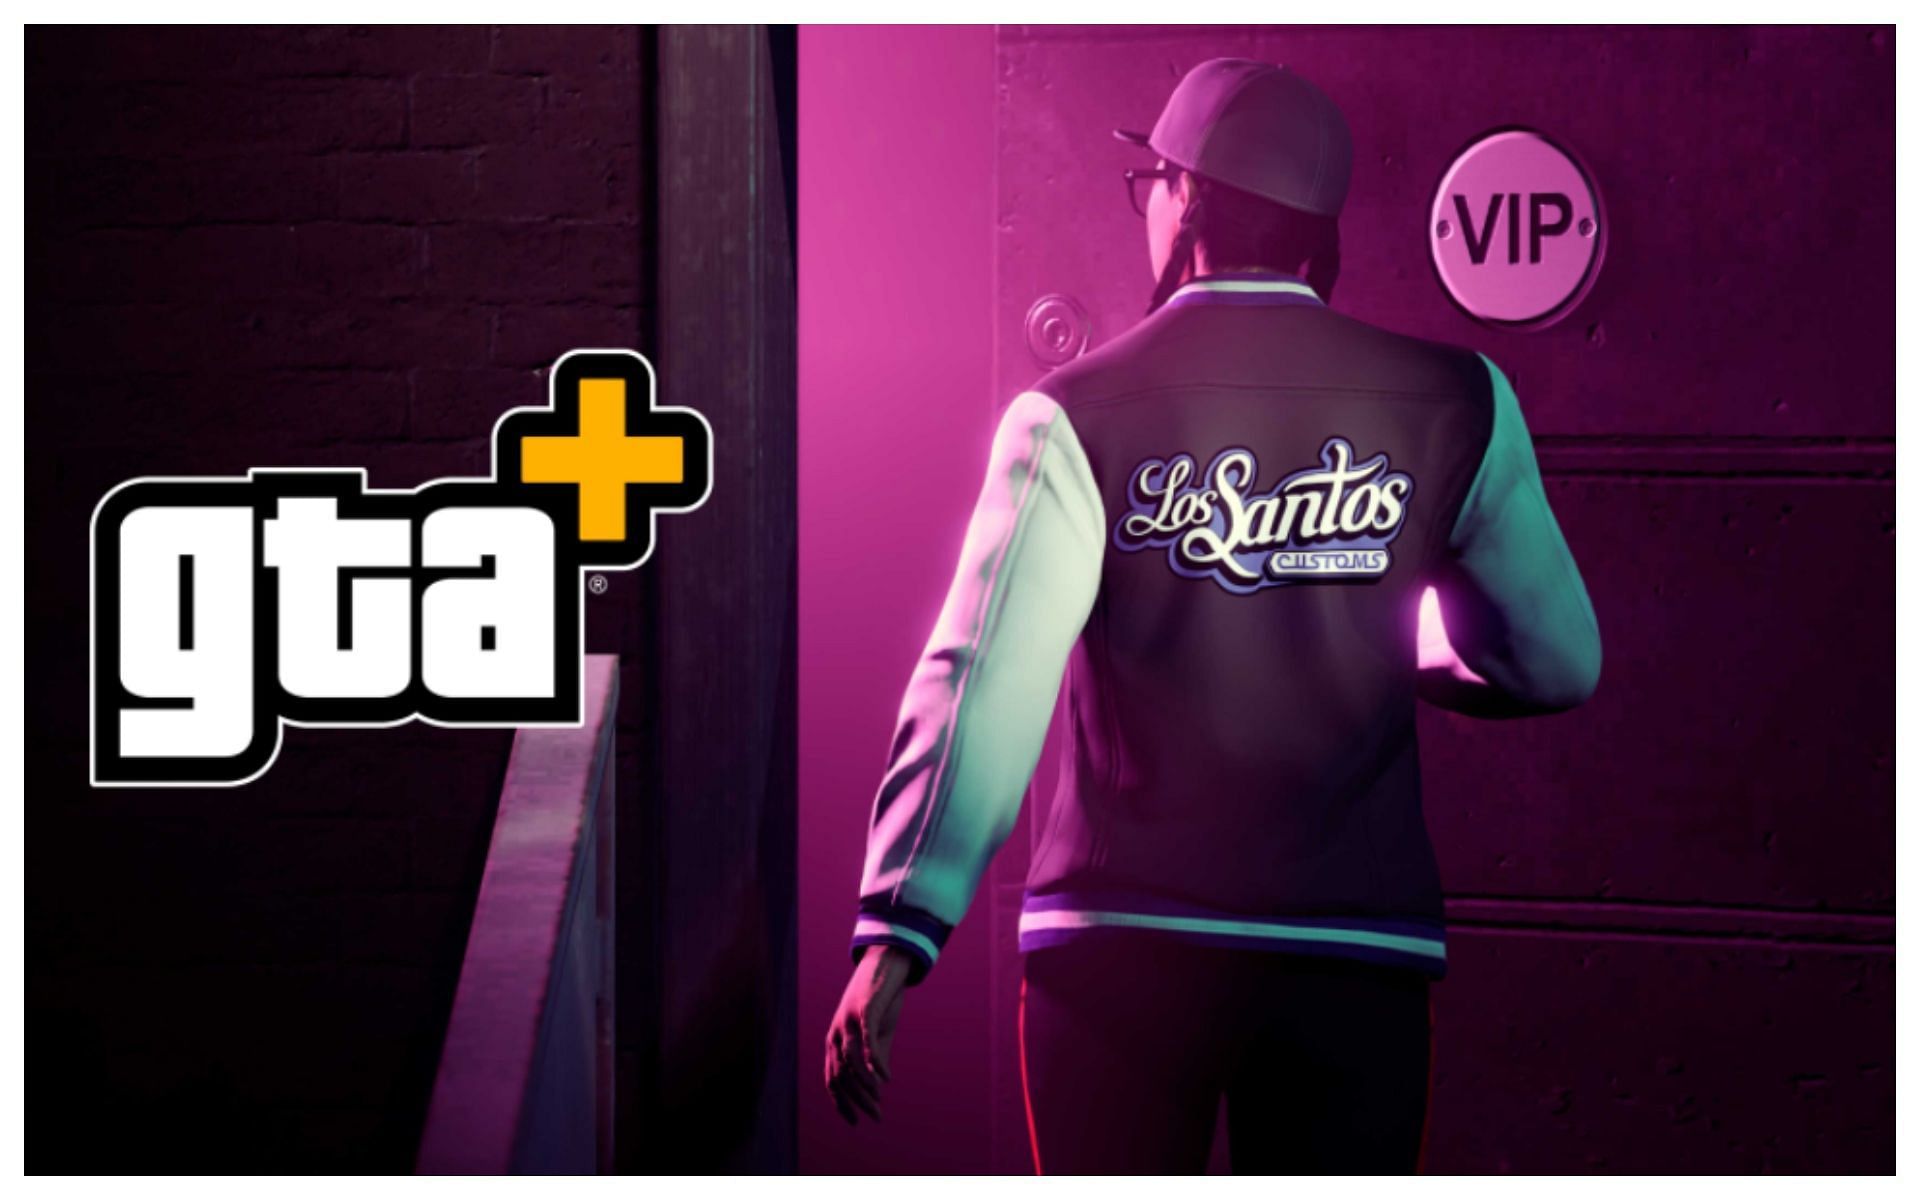 Is this another senseless cash-grab by Rockstar? (Image via Rockstar Games)